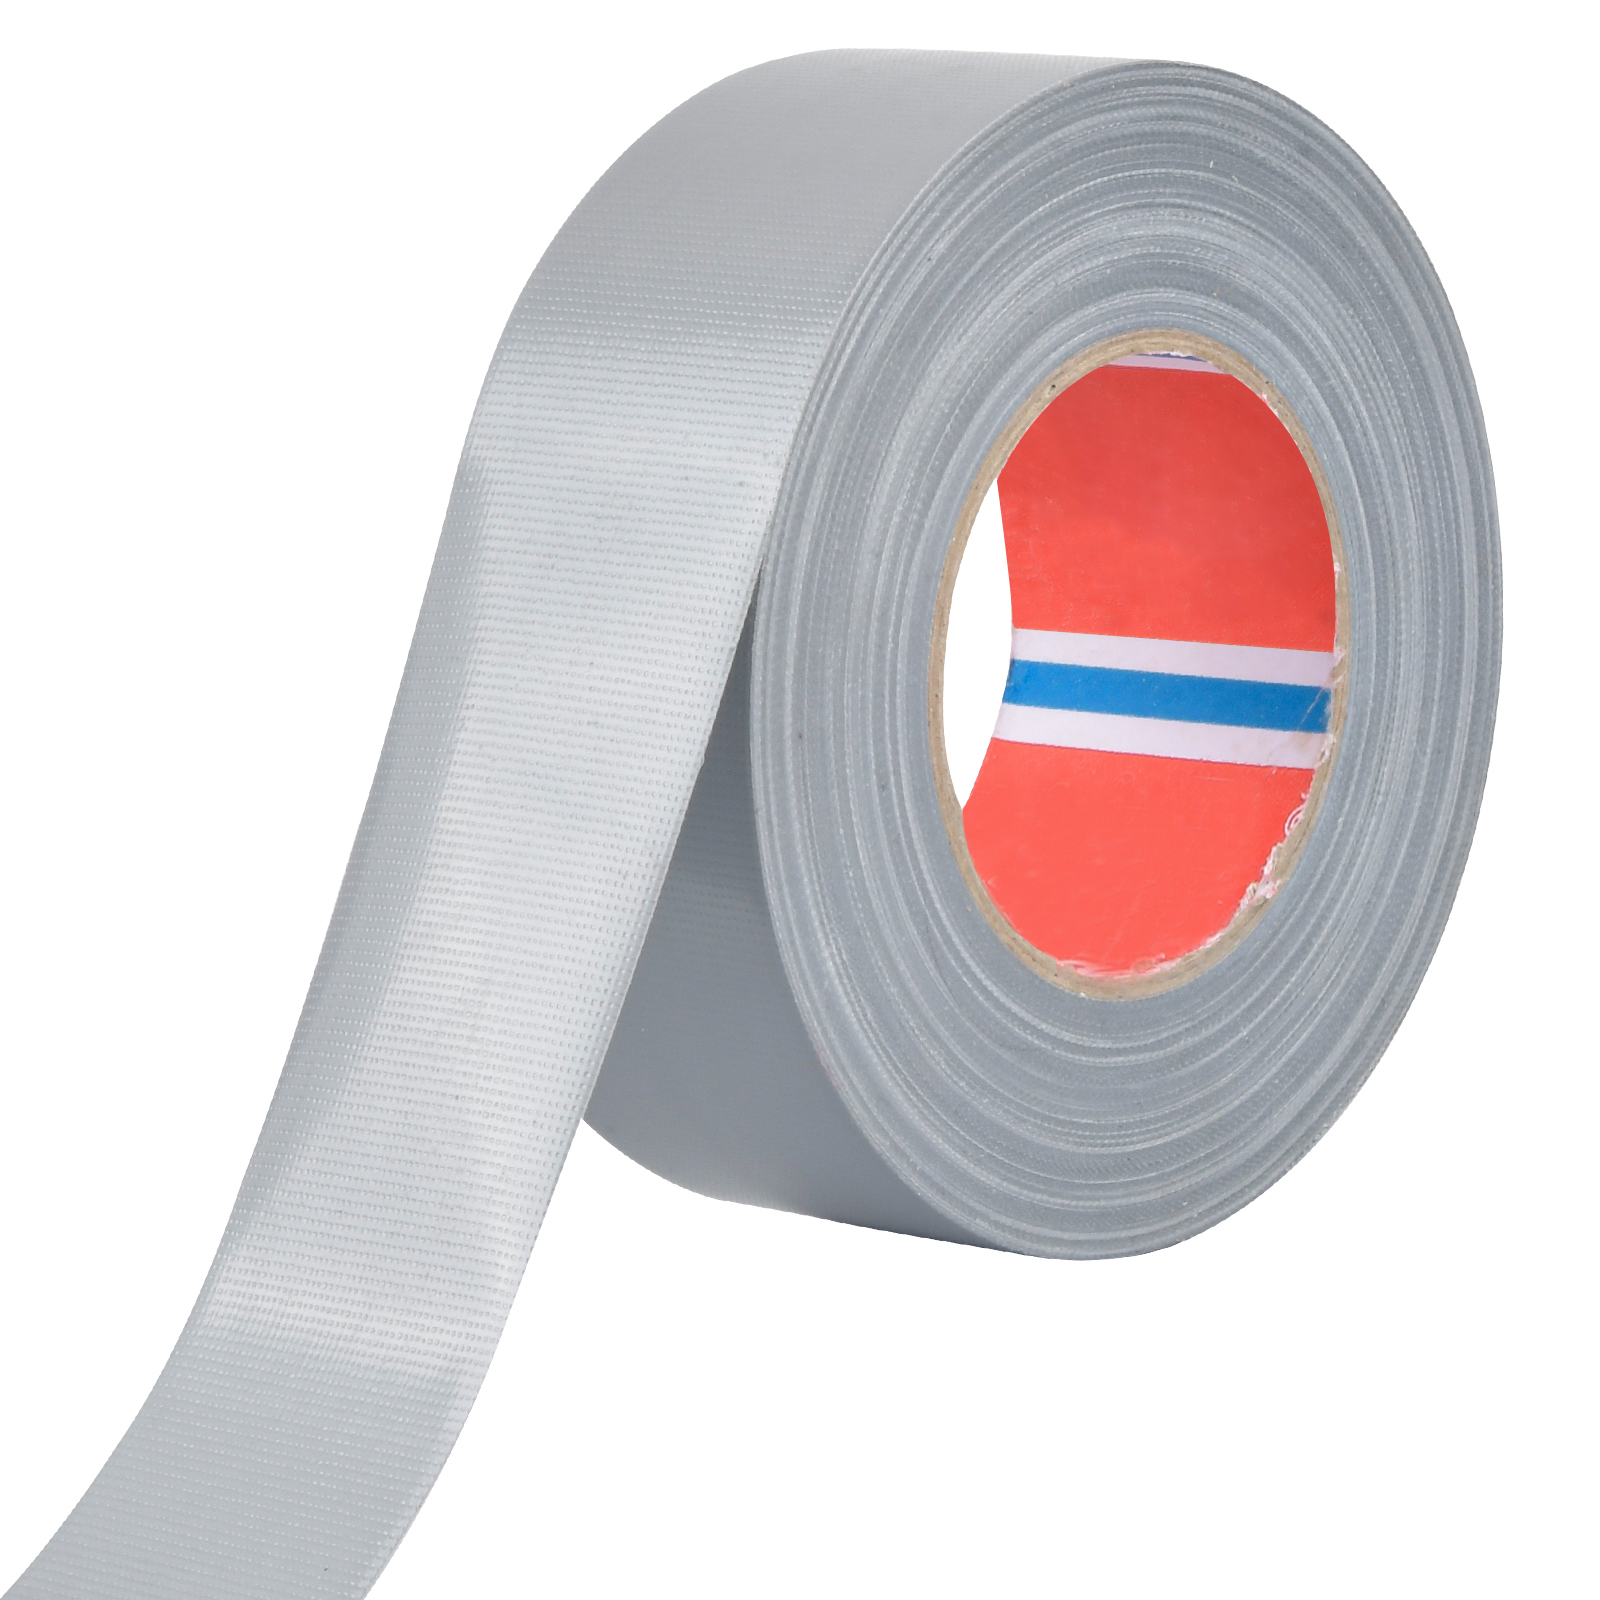 5 Rolls Duct Tape Heavy Duty For Workshop, 90 Yards X 2 Inches